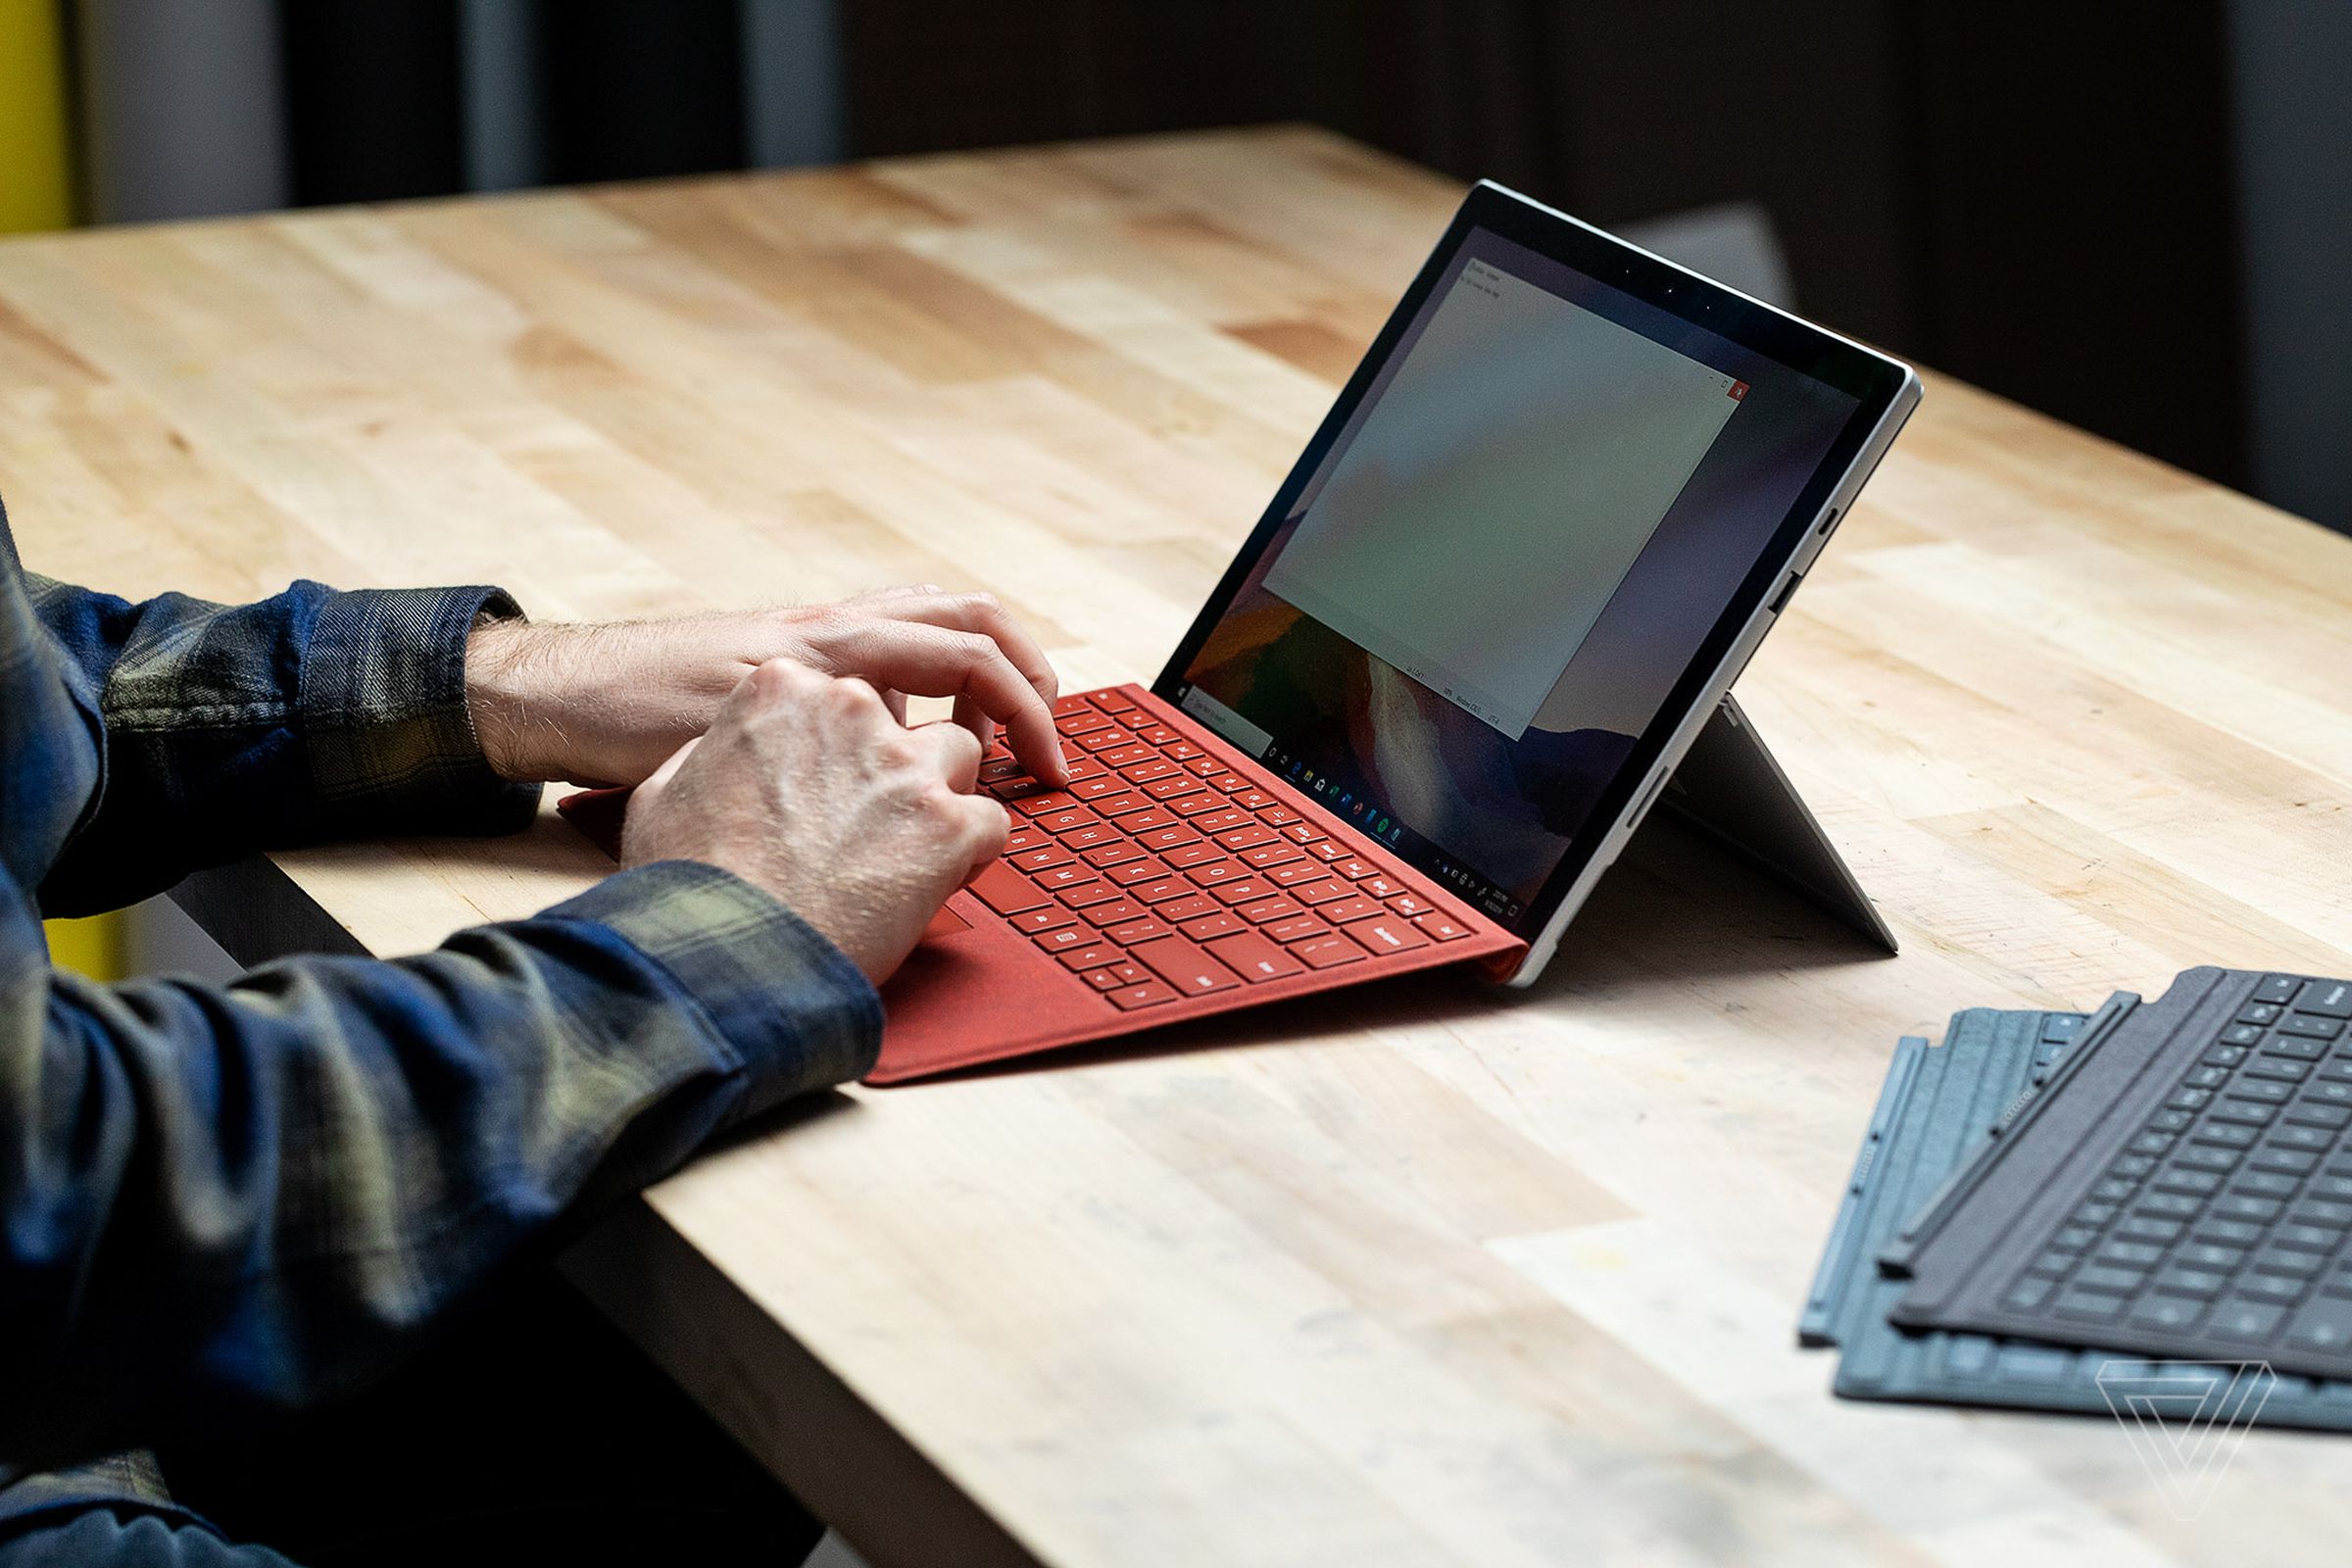 The last-gen Surface Pro 7 features older, 10th-gen Intel processors and lacks Thunderbolt ports.